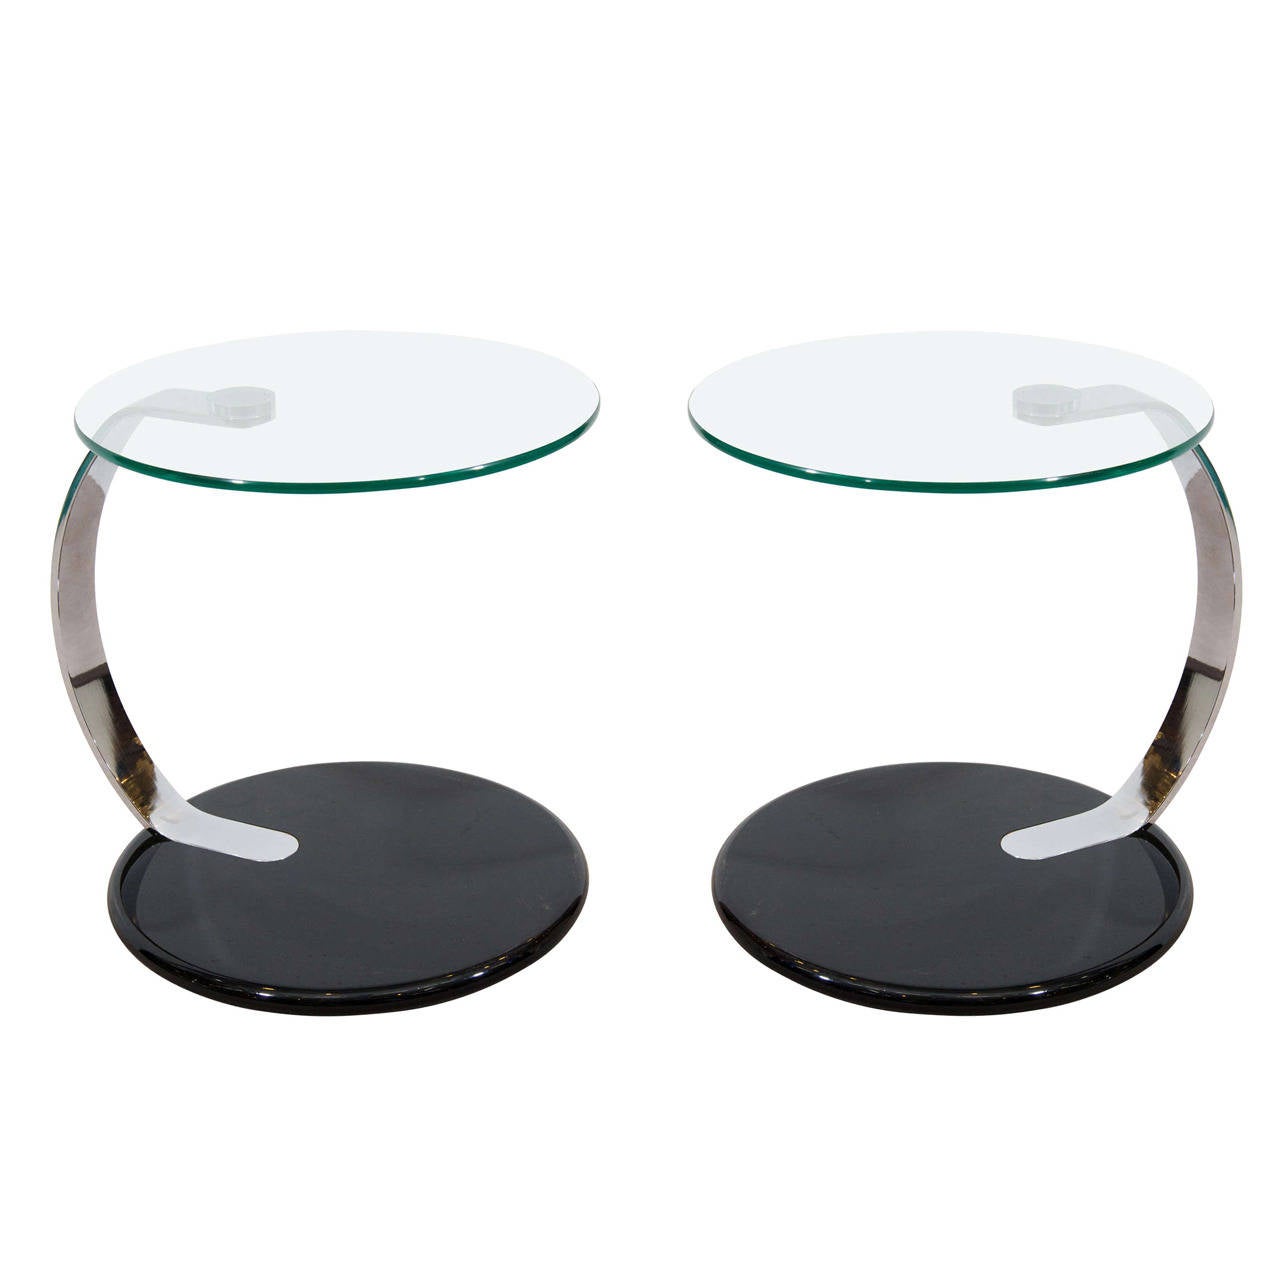 1980s Pair of Circular Glass and Chrome Side or End Tables